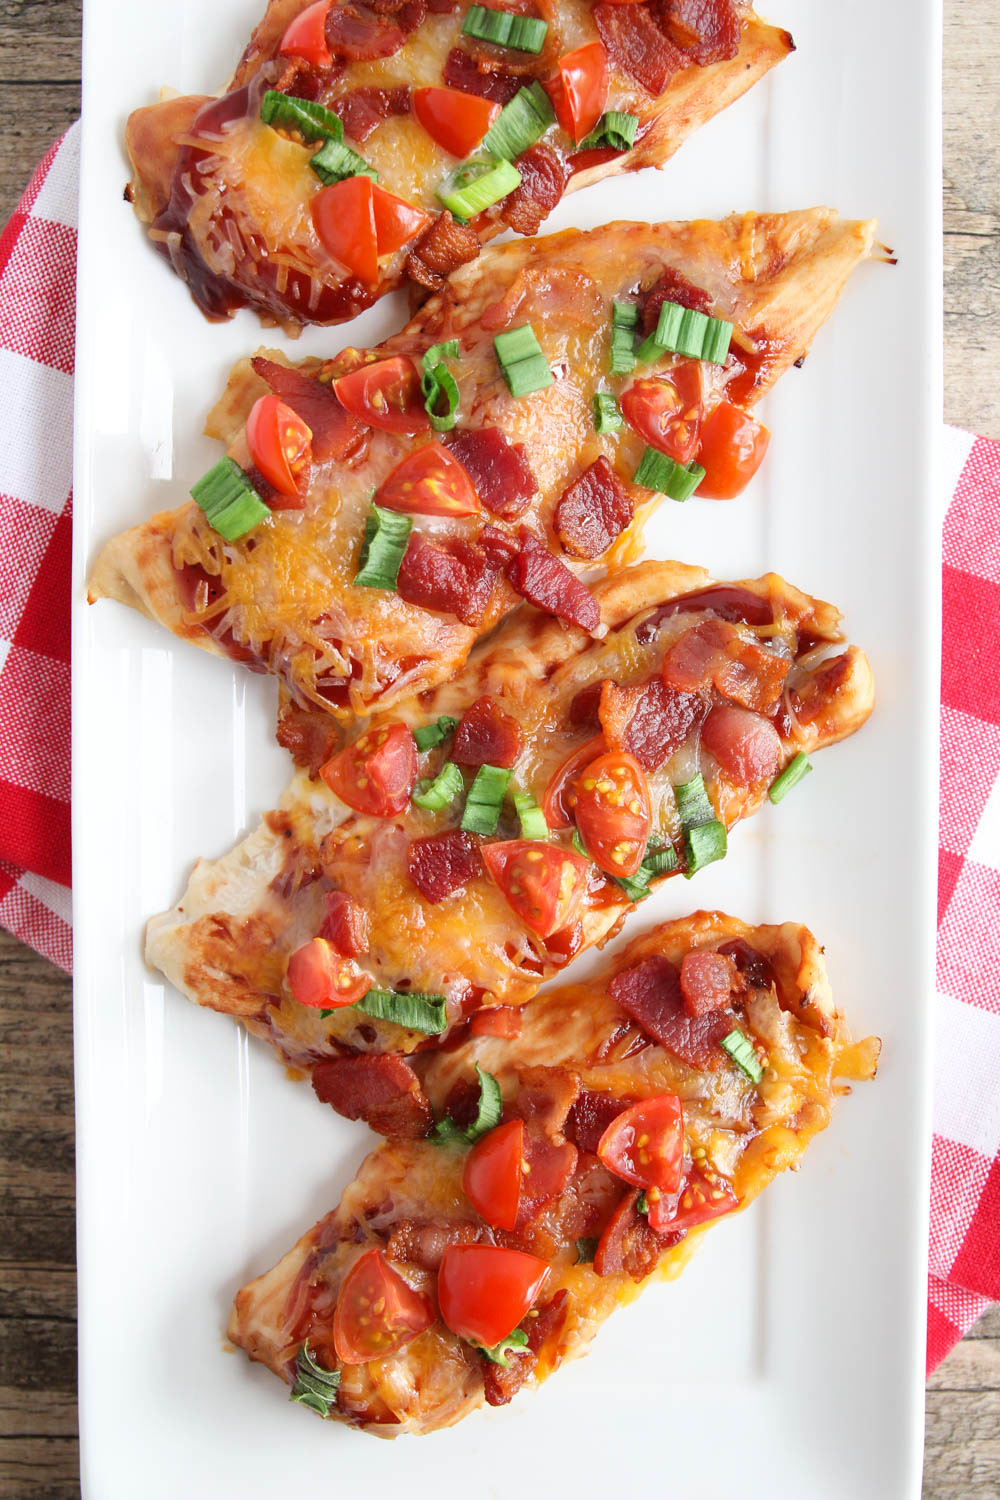 This flavorful Monterey chicken is smothered in barbecue sauce, gooey cheese, fresh green onions and tomatoes, and crispy bacon. An easy and delicious main dish the whole family will love!